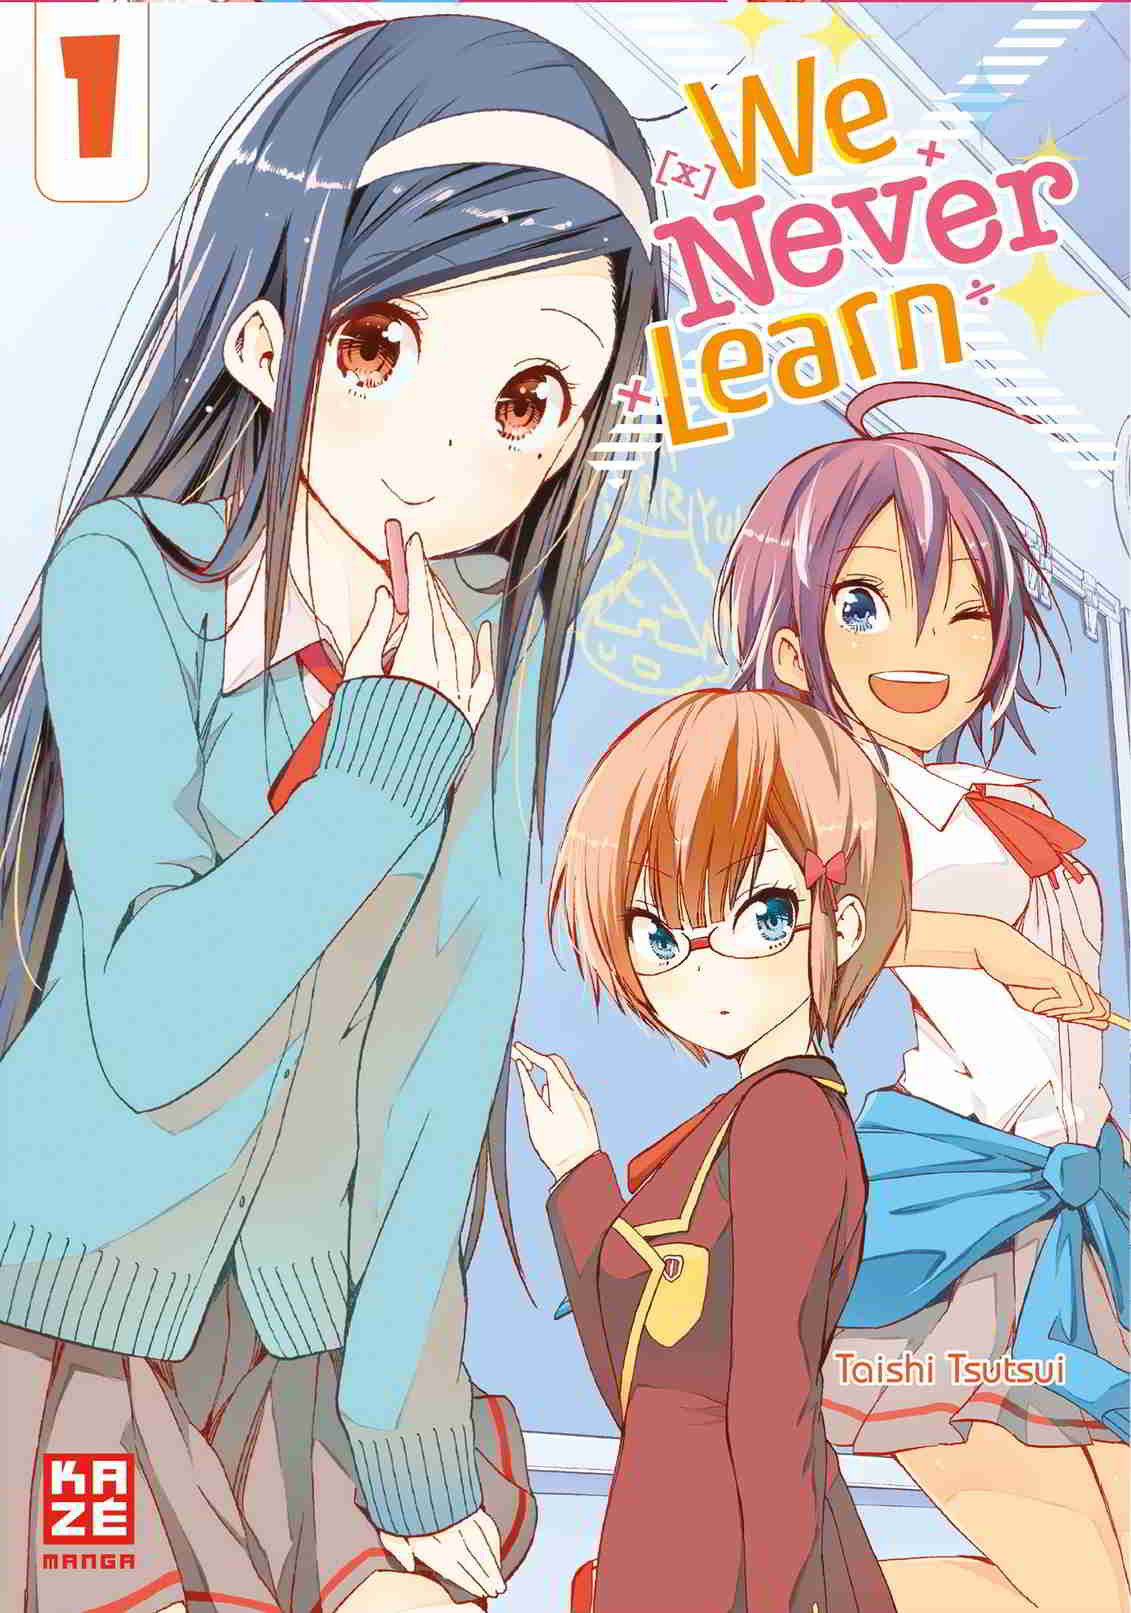 We never learn #1